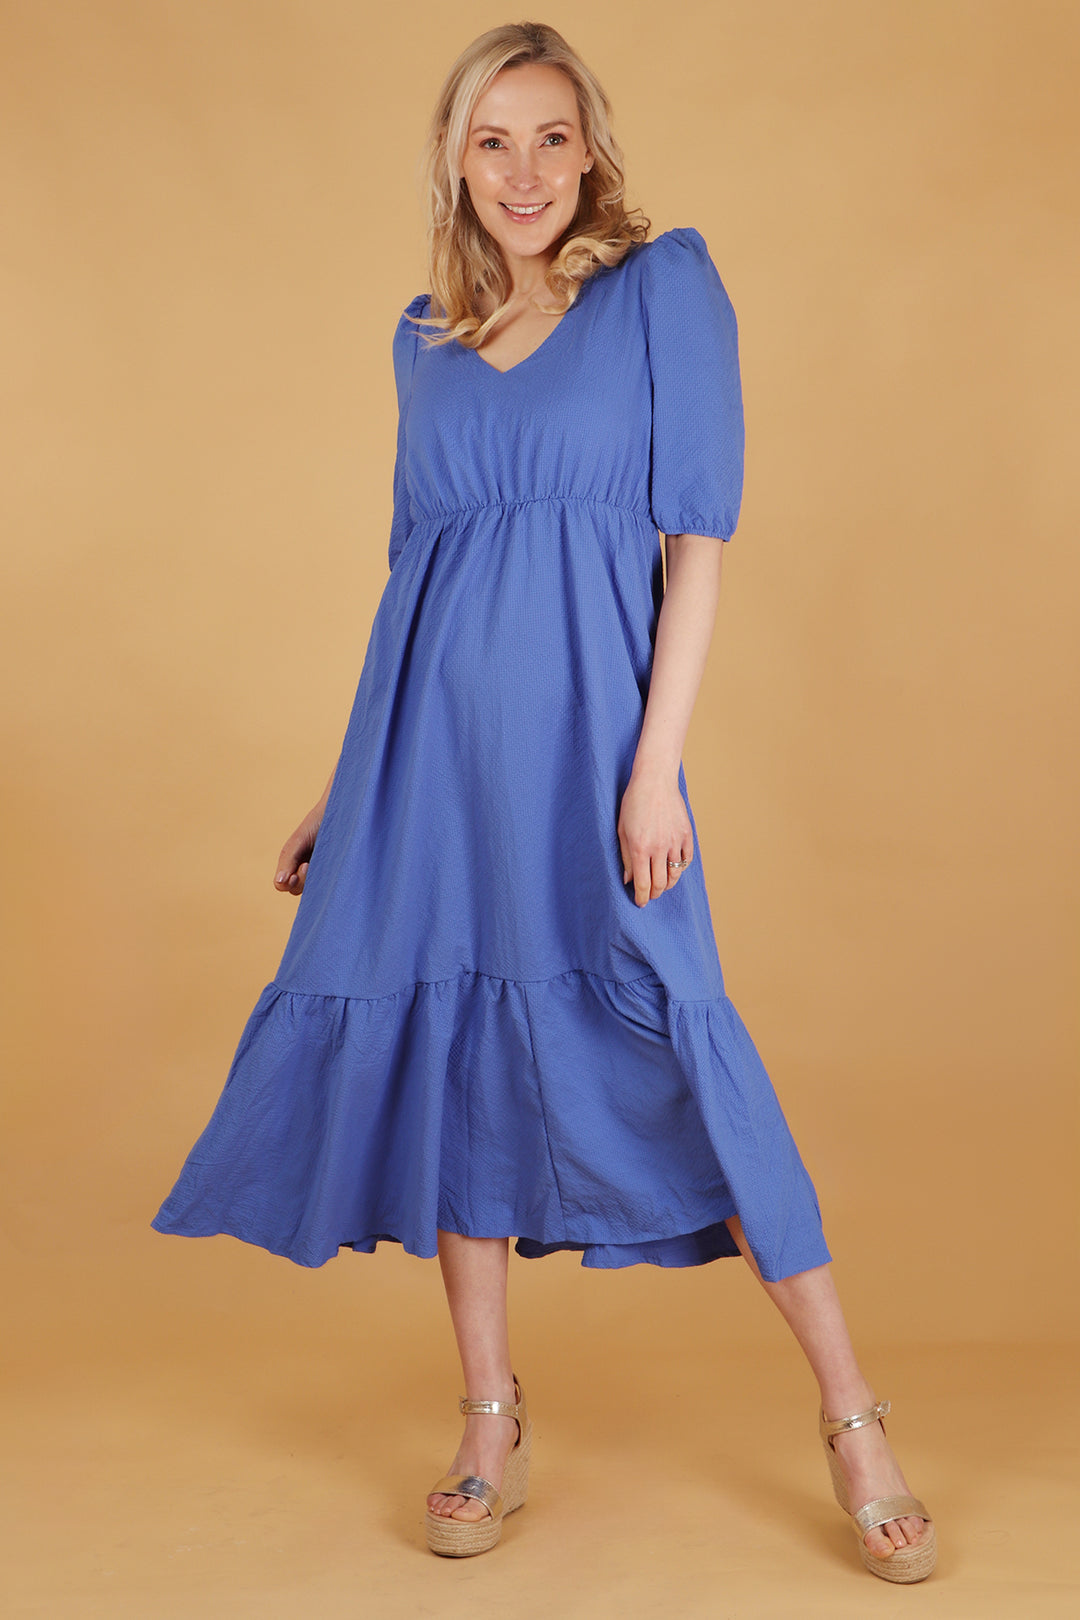 model wearing a plain blue textured midaxi length tiered dress with a vneck and short sleeves